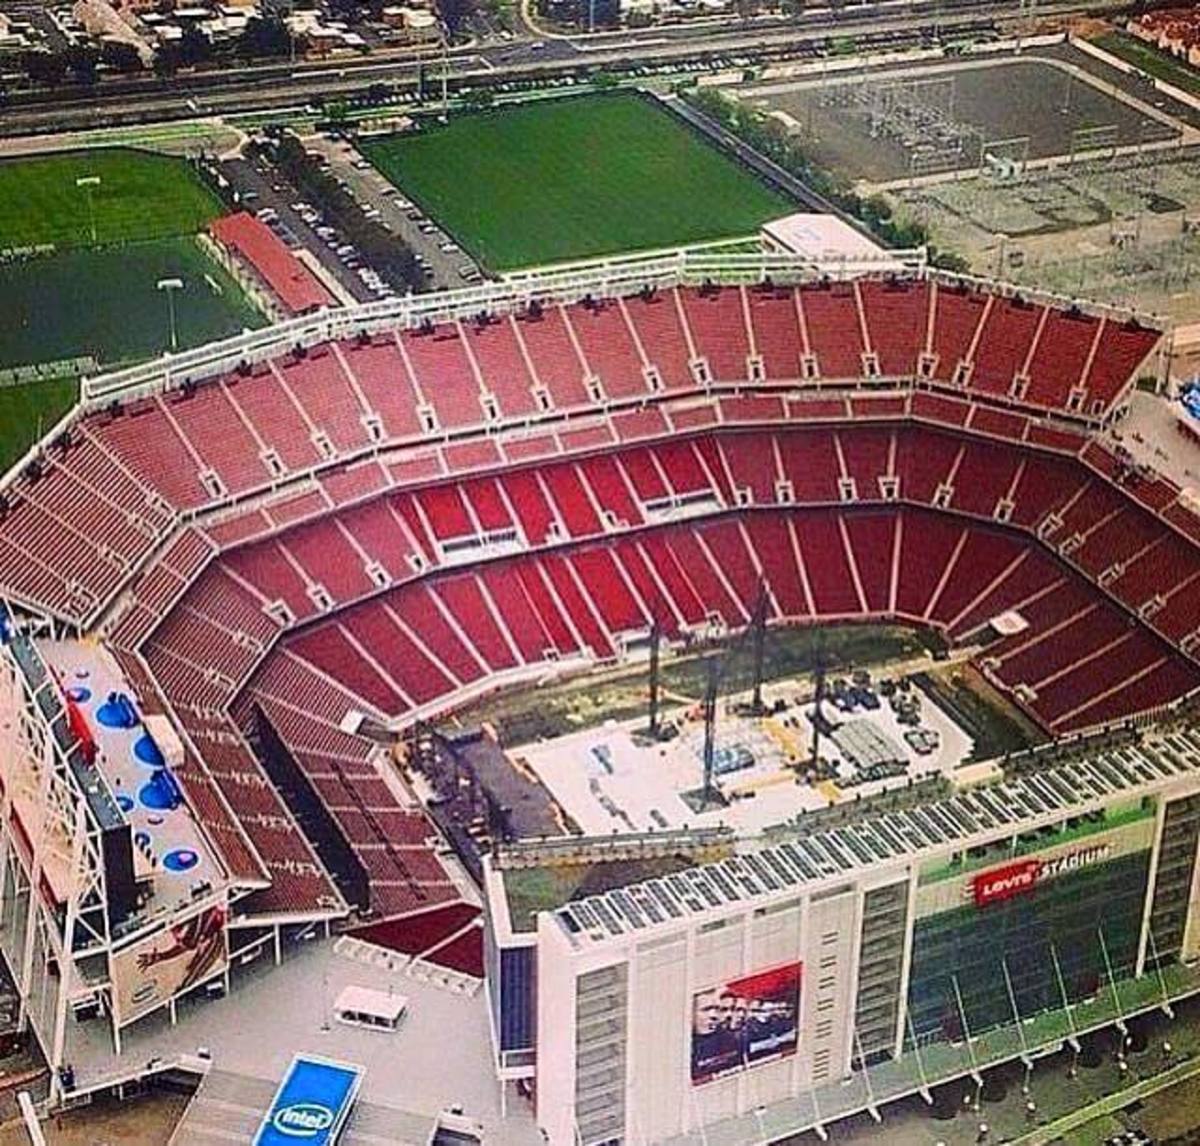 New Photo Of Levi's Stadium Being Set Up For WrestleMania - SE Scoops |  Wrestling News, Results & Interviews